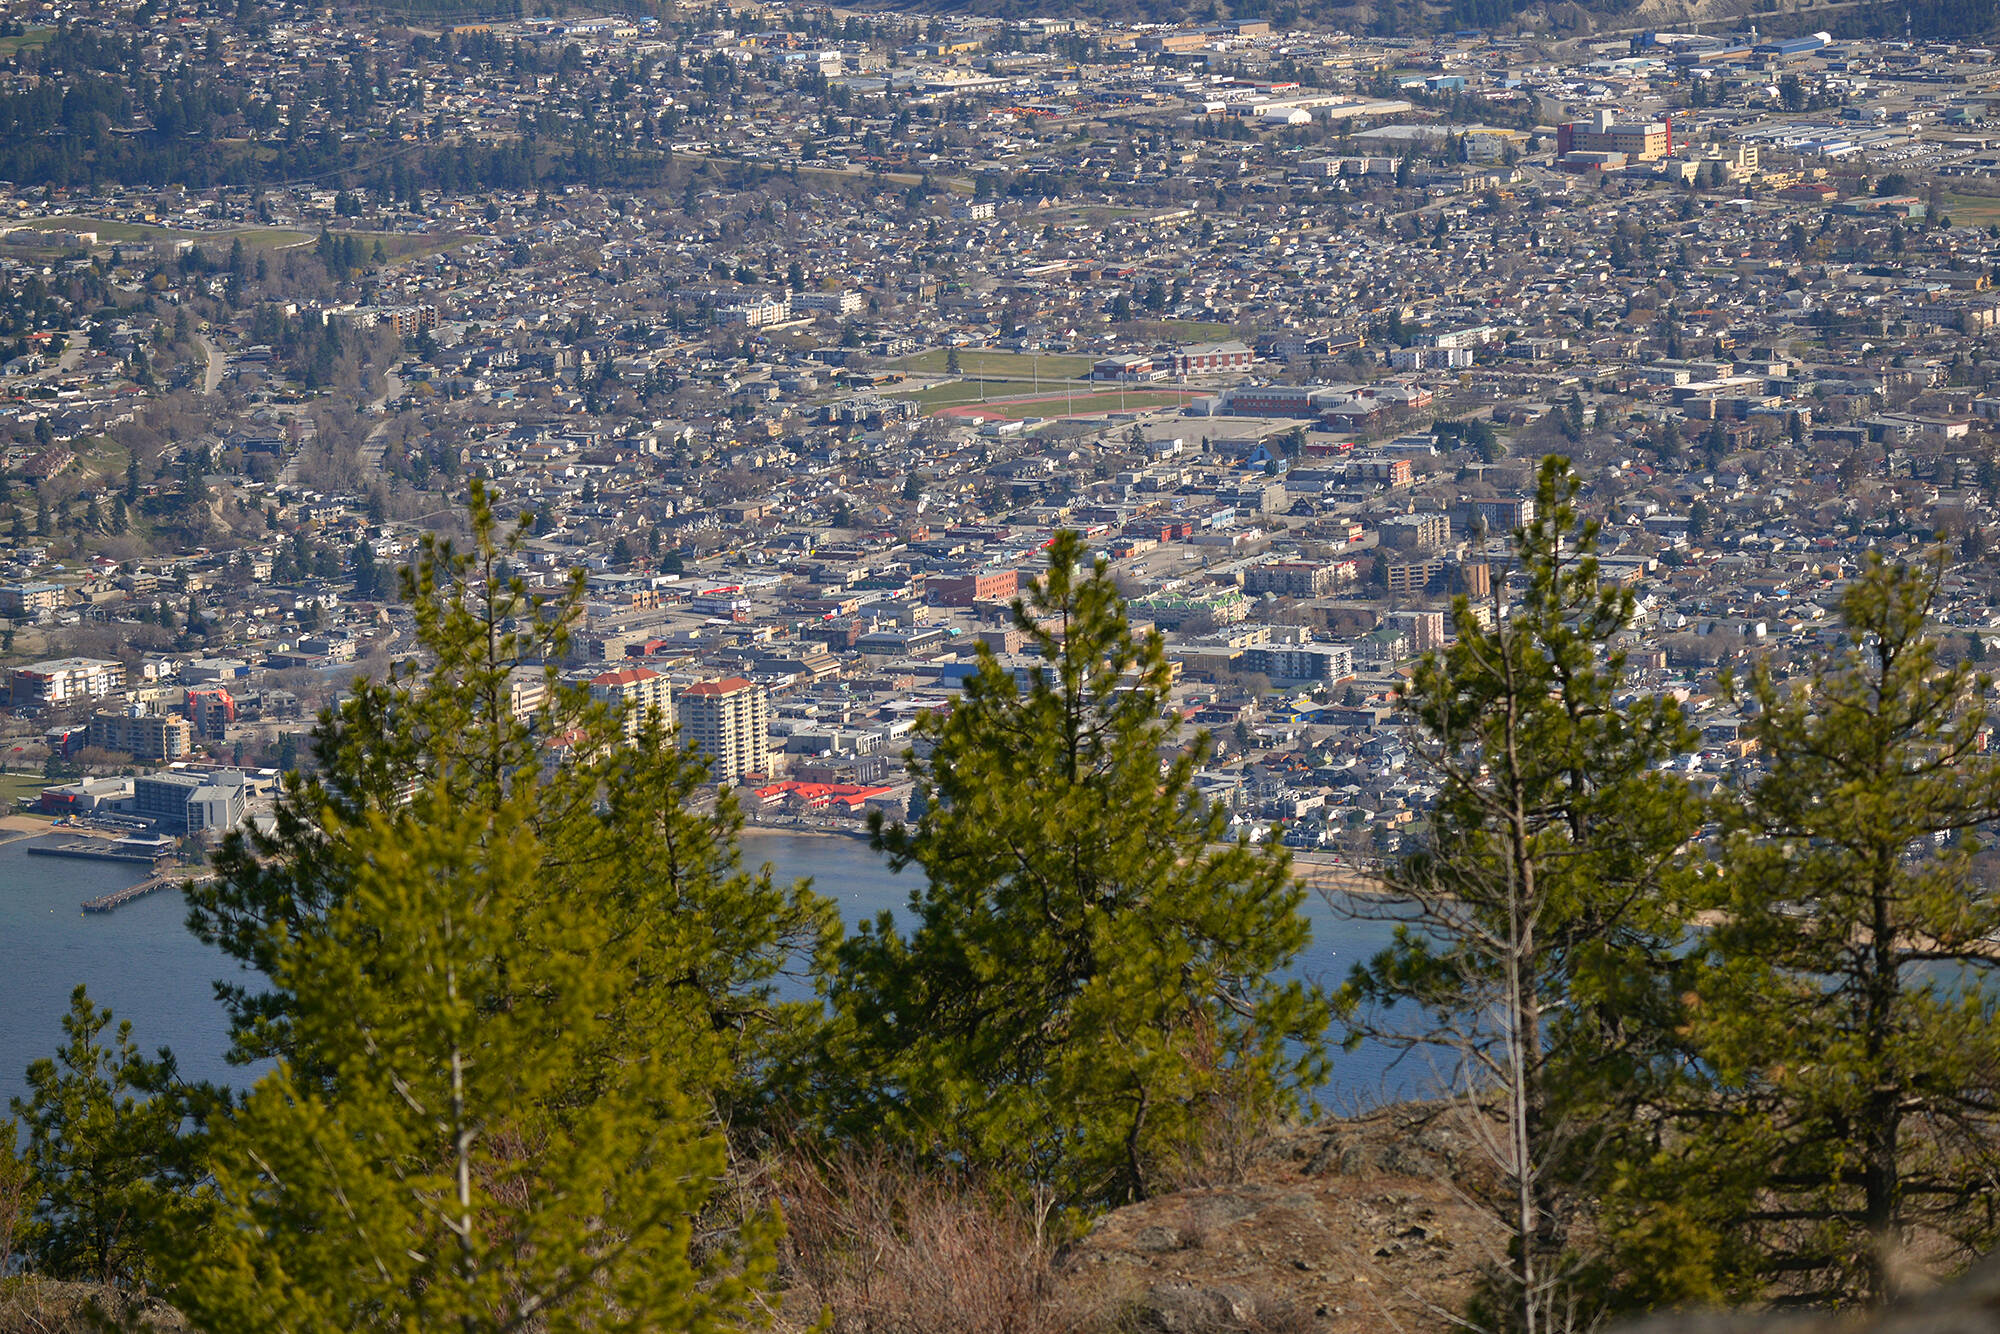 Economic development officers from across B.C. are meeting in Penticton May 6 to 9 at the BC Economic Summit. Representatives from industry, as well as provincial, federal and First Nations representatives, will be attending. Issues include the state of the workforce as well health care. (Black Press Media file photo).